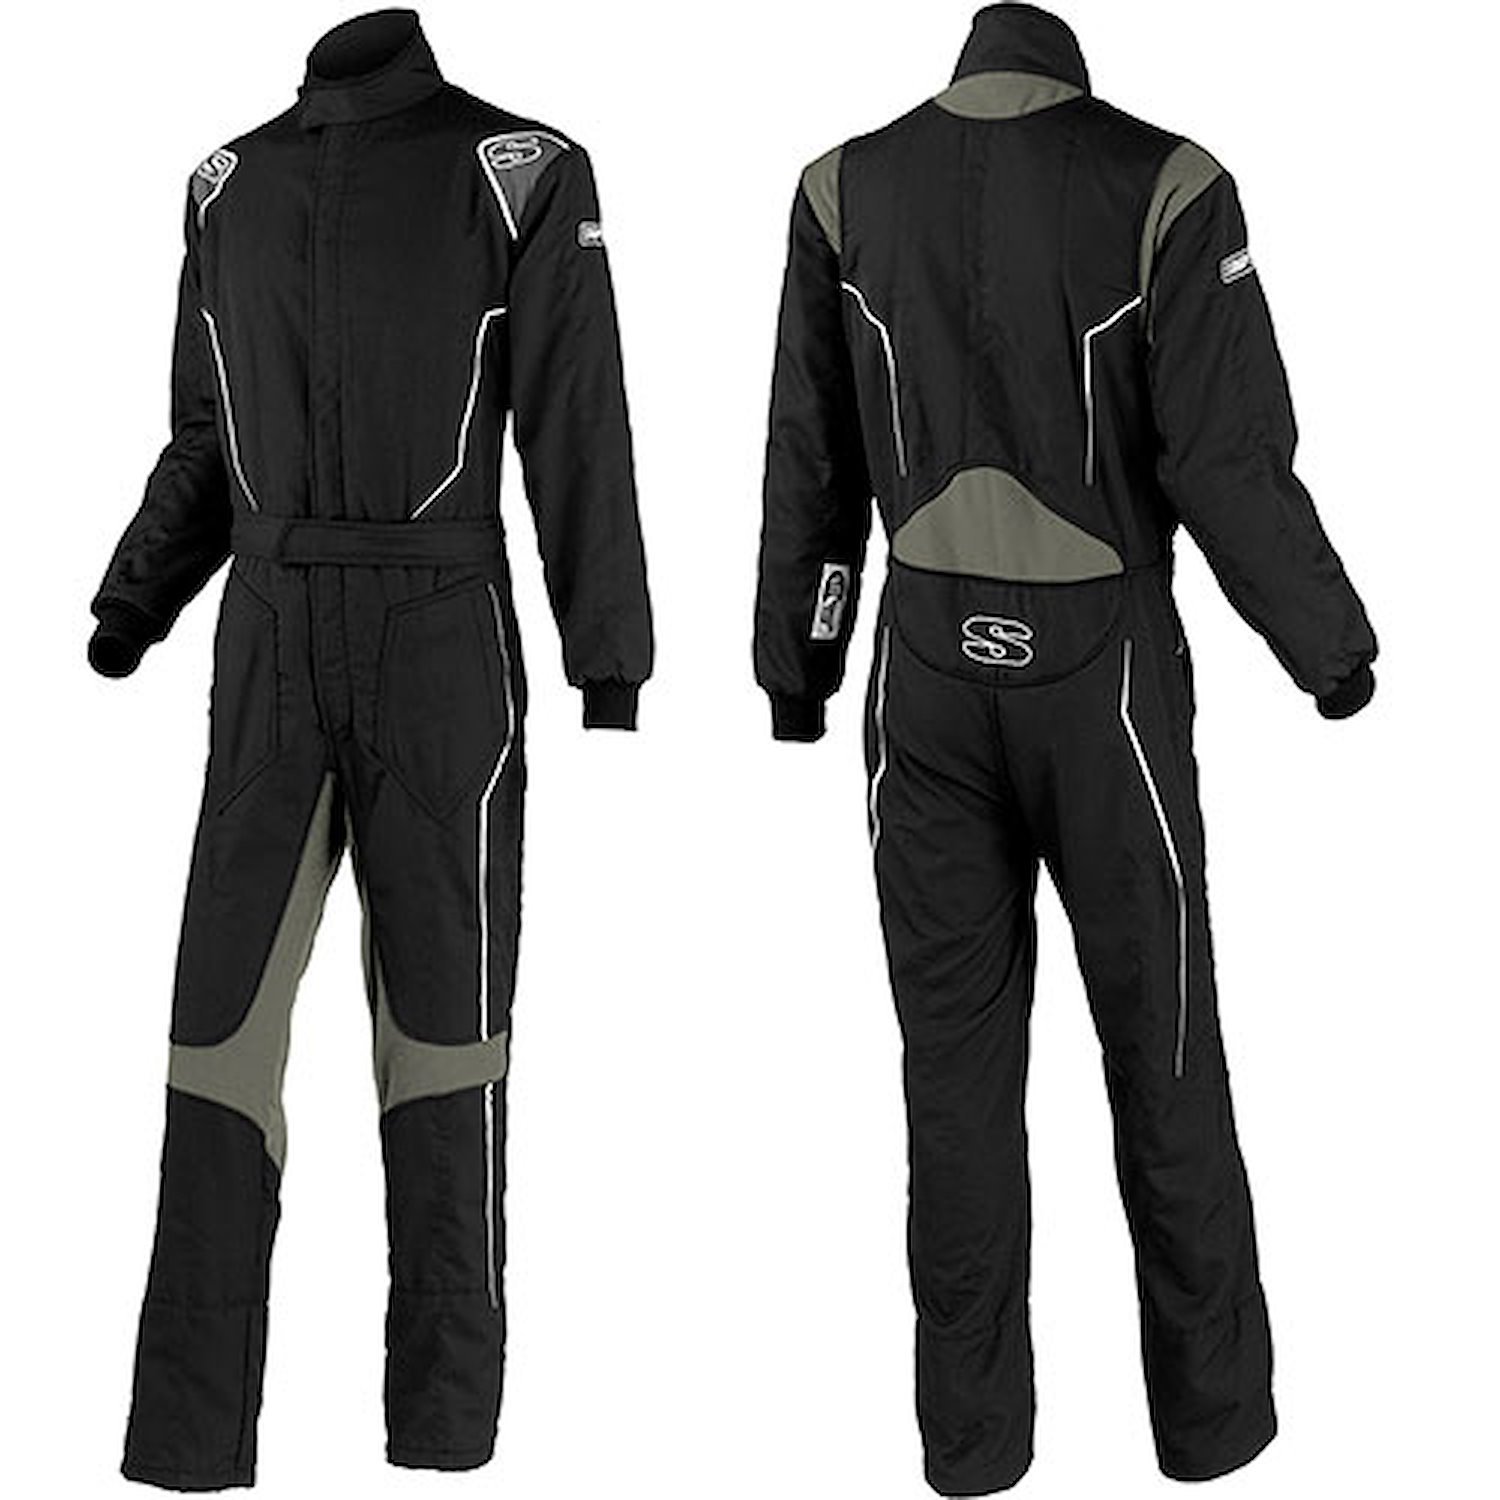 Helix Youth Racing Suit Large